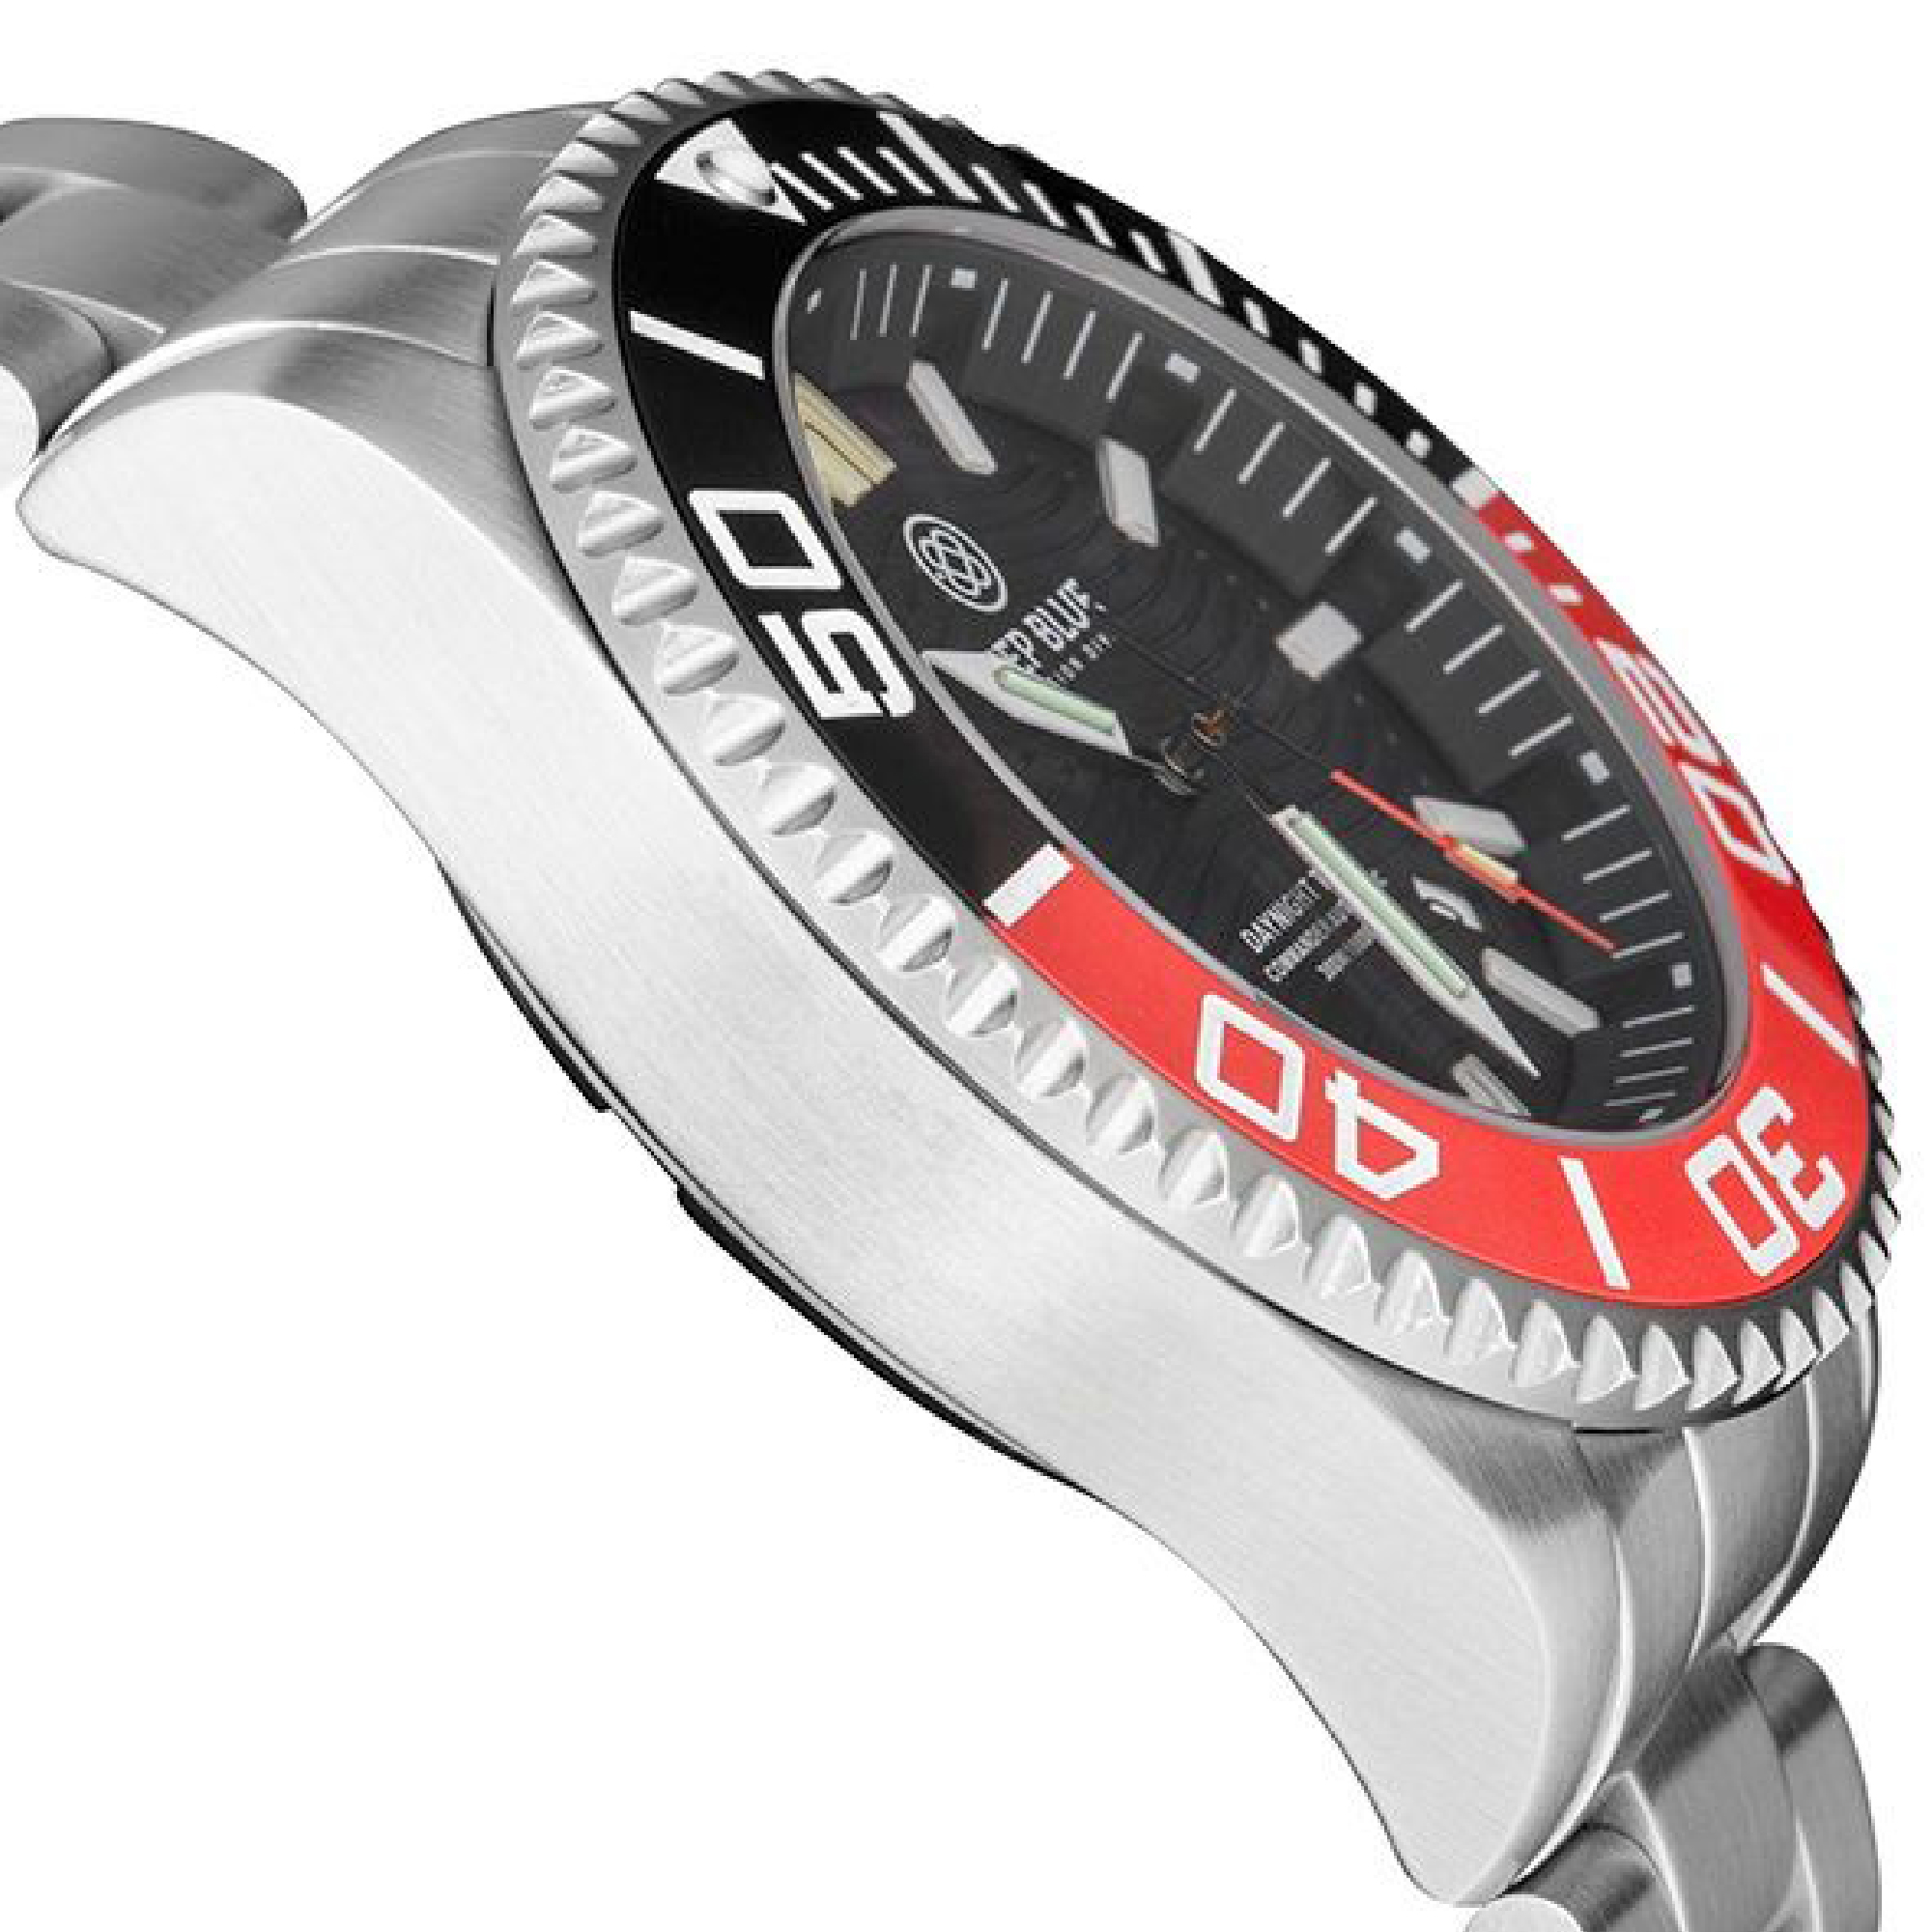 Deep Blue DayNight Commander T-100 Automatic Men's Diver Watch Black-Red Bezel/Black Dial - Click Image to Close